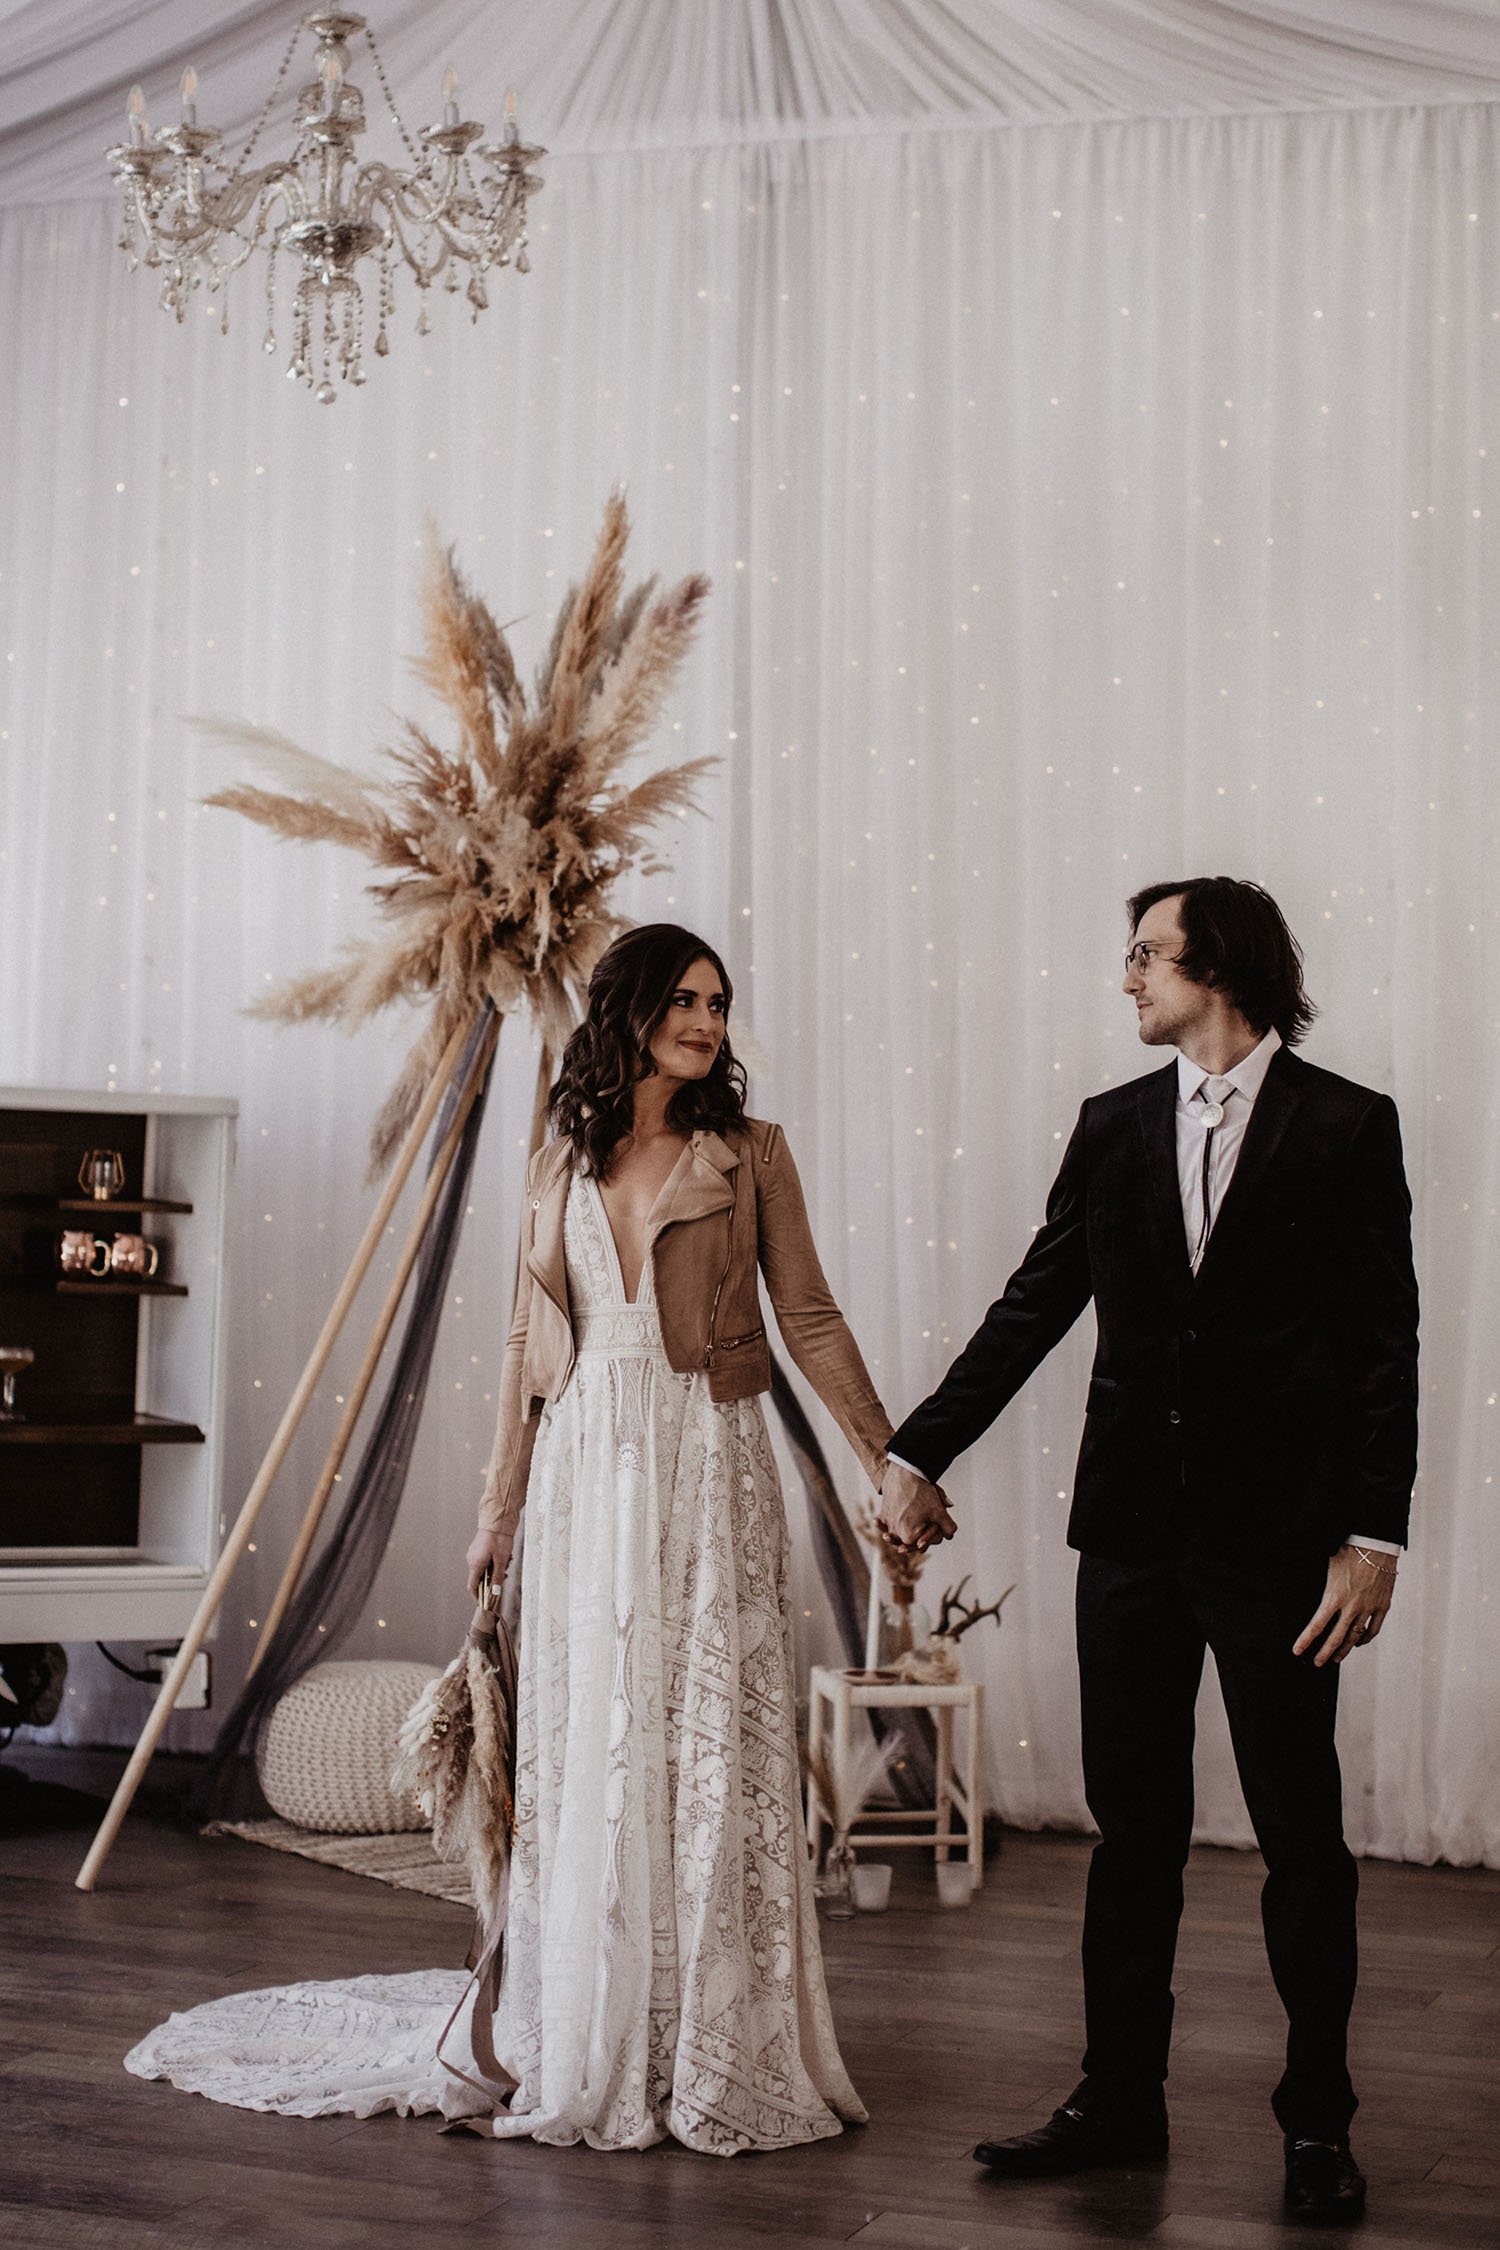  A bride wearing Rue de Seine Kyara wedding dress, which is a deep-v banded waist bold lace dress with a dramatic train. She is also wearing a brown leather jacket and holding a bouquet of pampas grass in one hand and the grooms hand in the other. Th